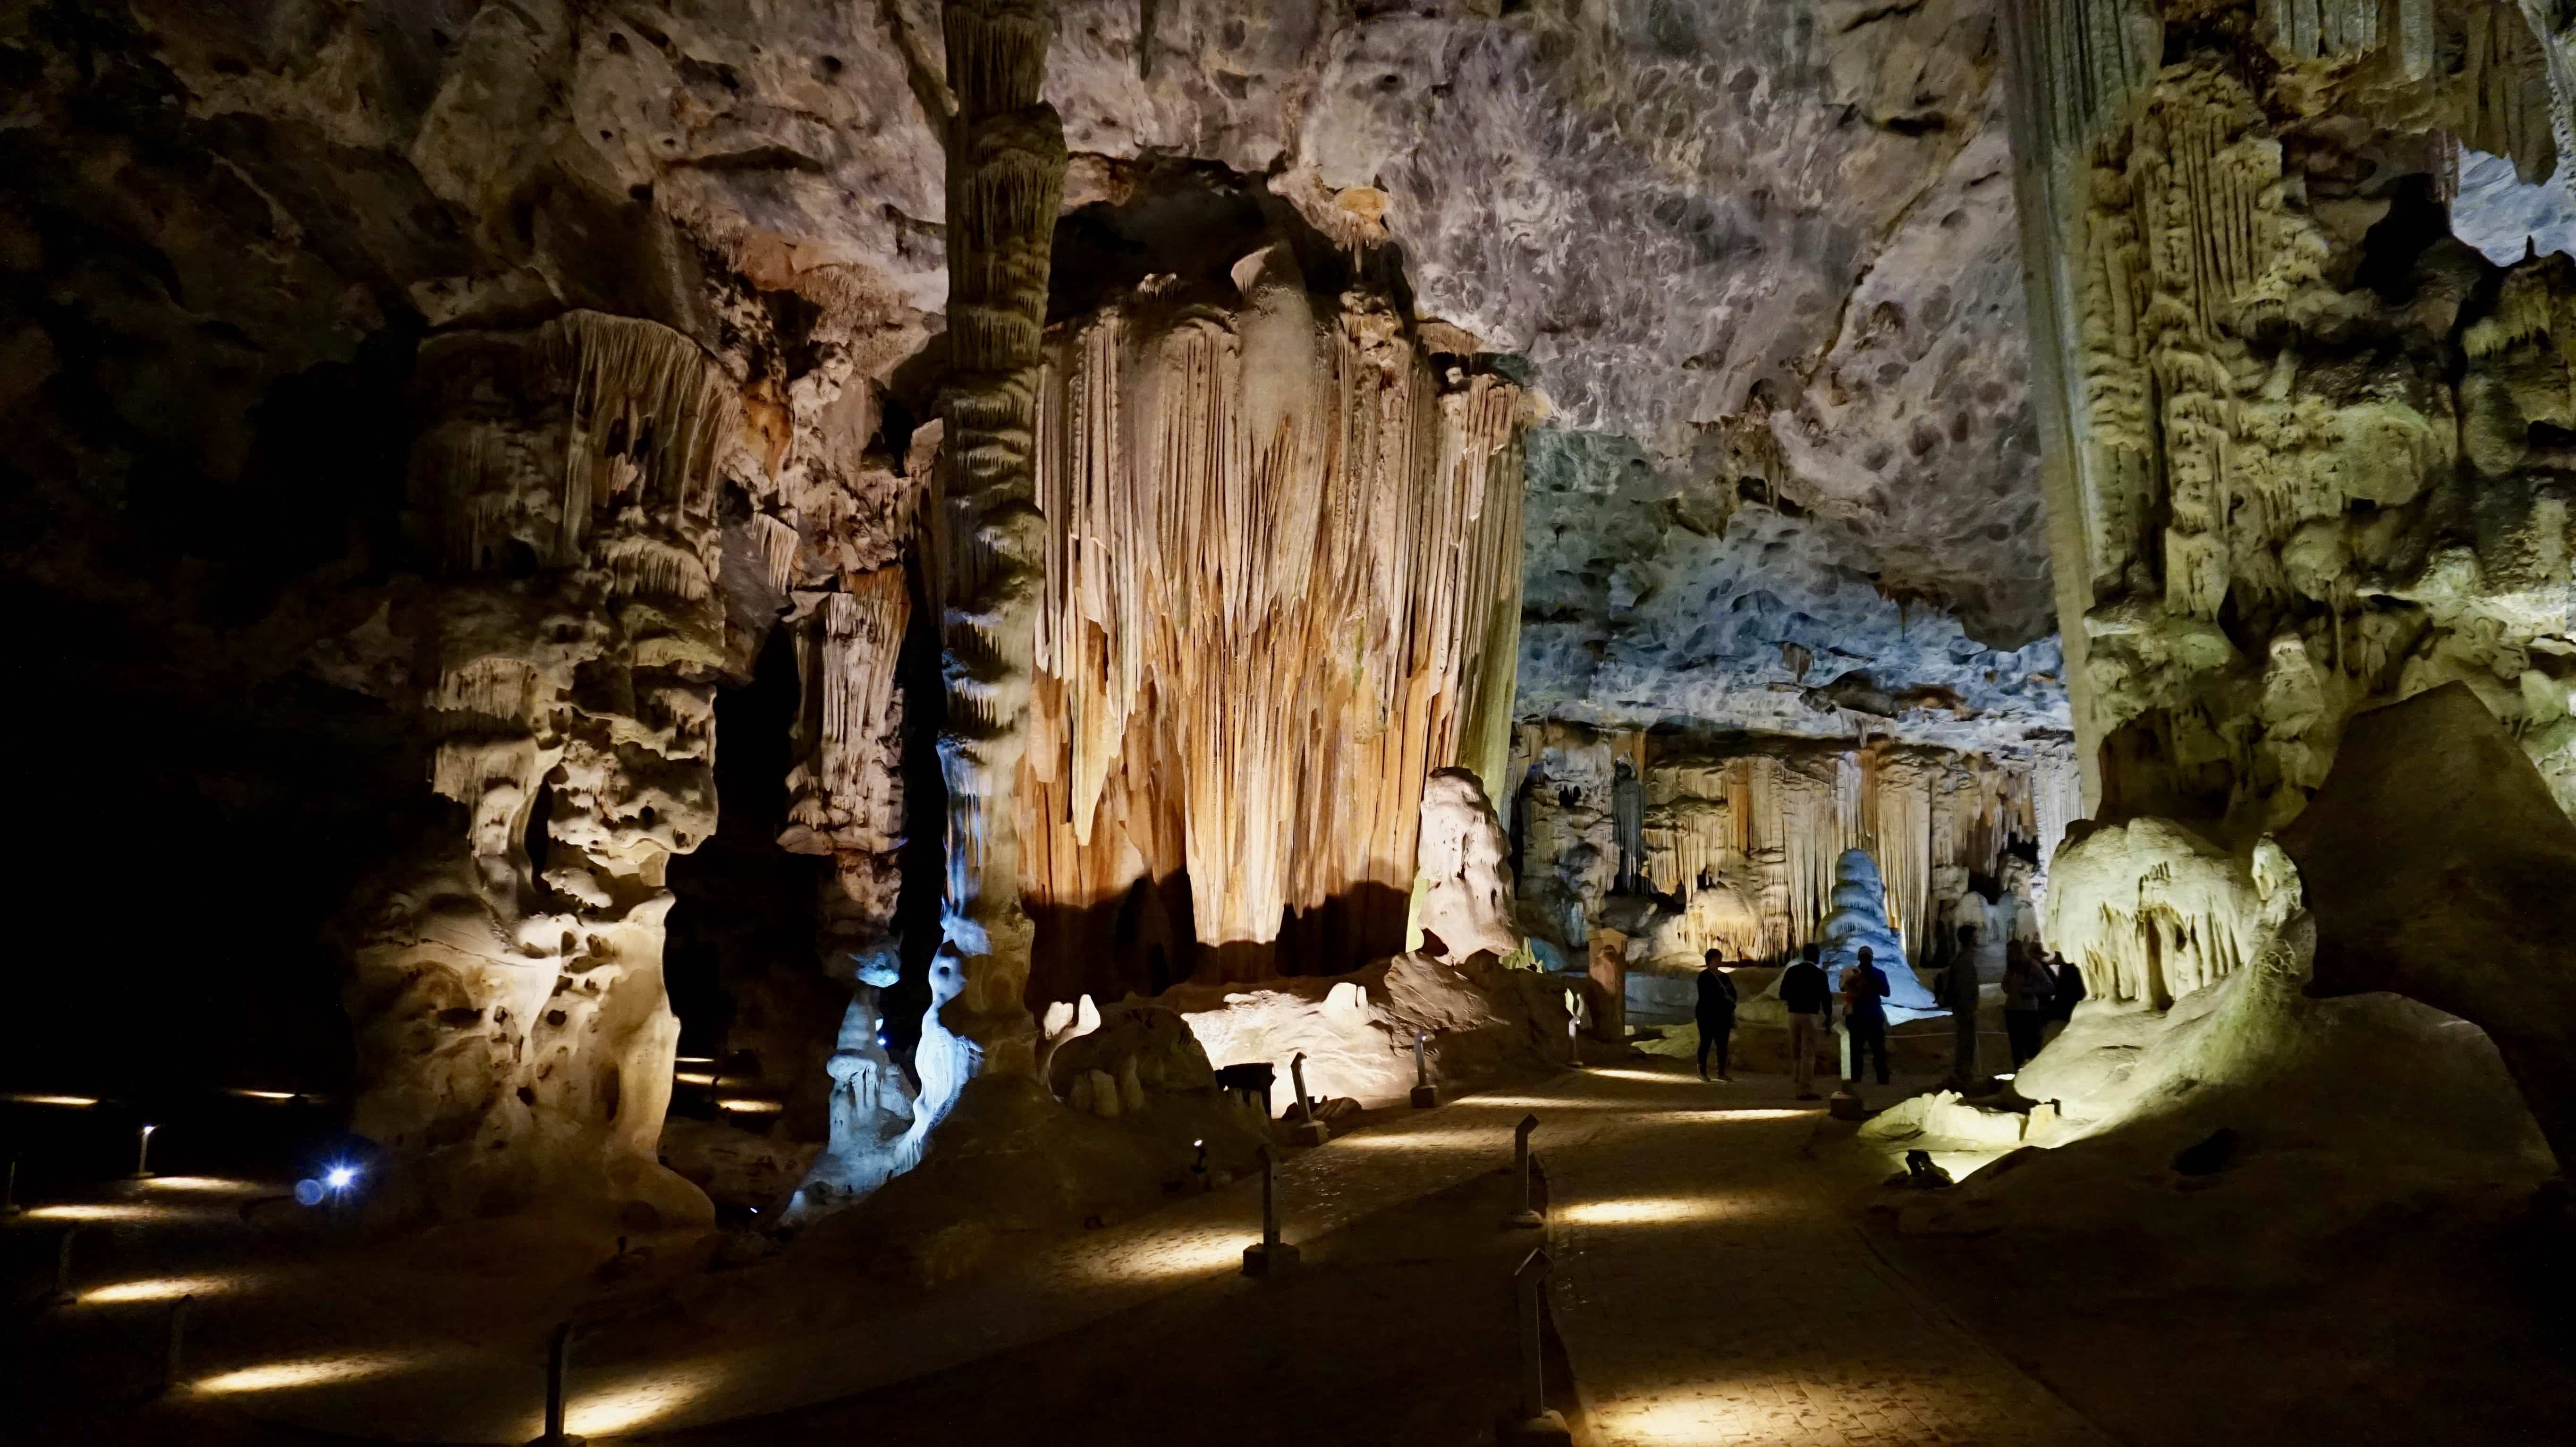 Stalactites and stalagmites at the Cango Caves in South Africa 